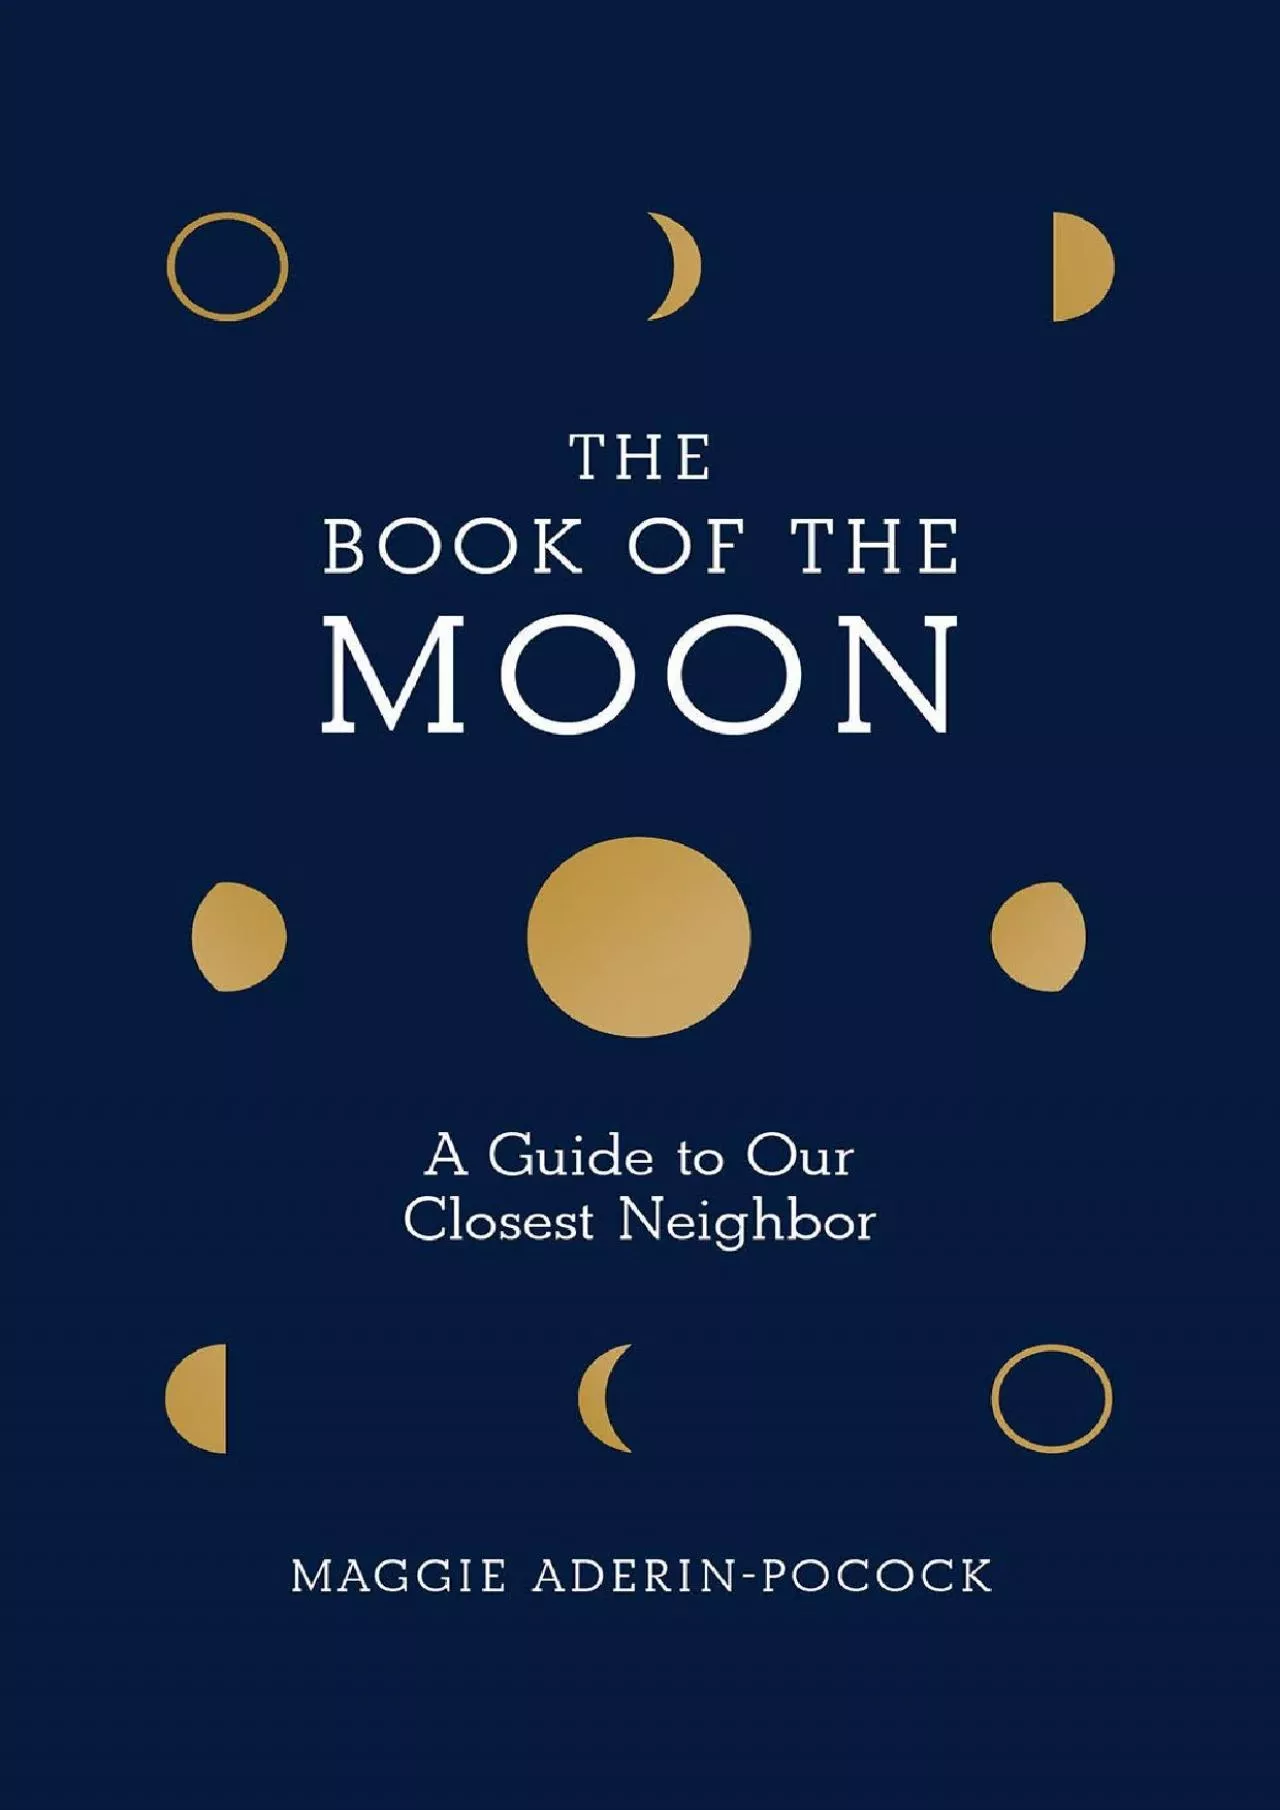 (DOWNLOAD)-The Book of the Moon: A Guide to Our Closest Neighbor